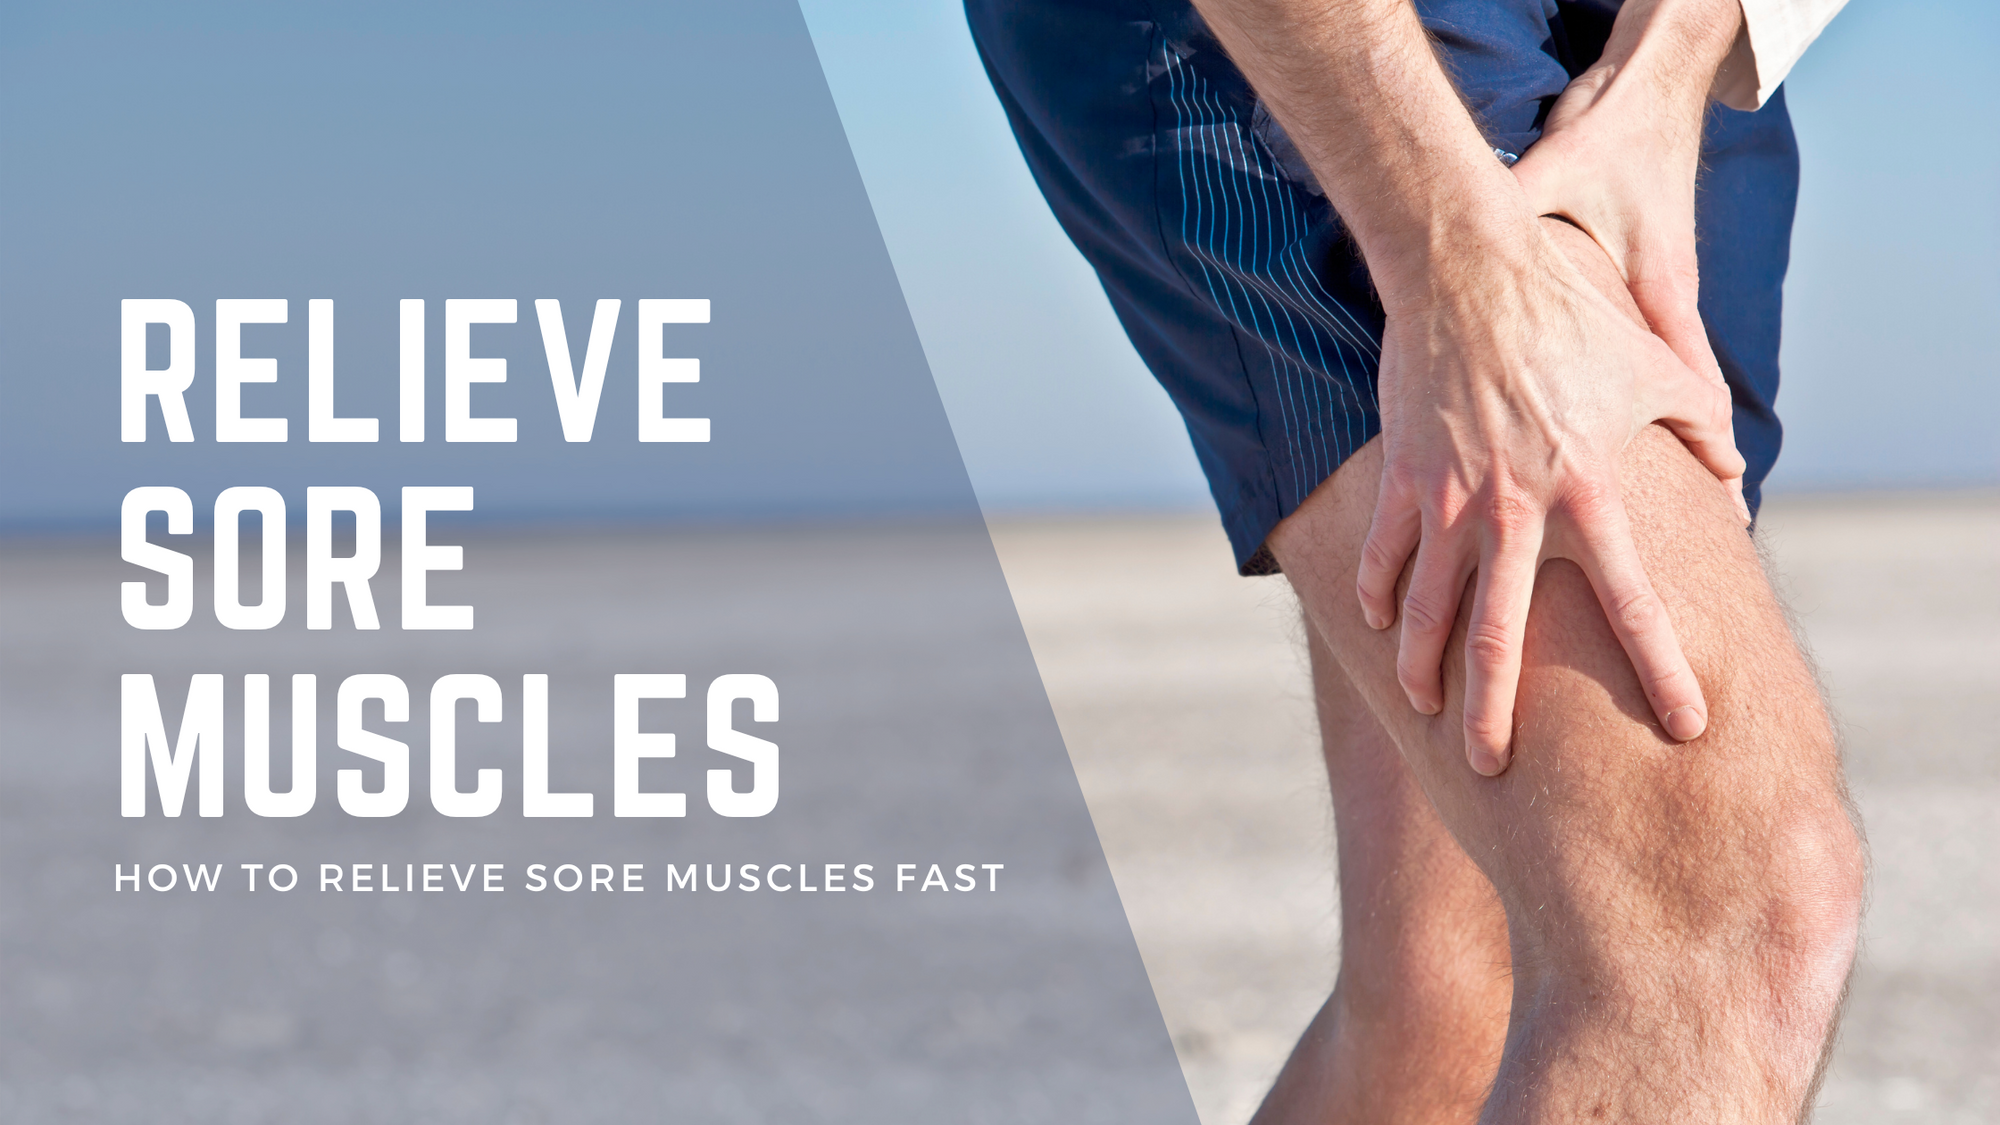 How to relieve sore muscles fast